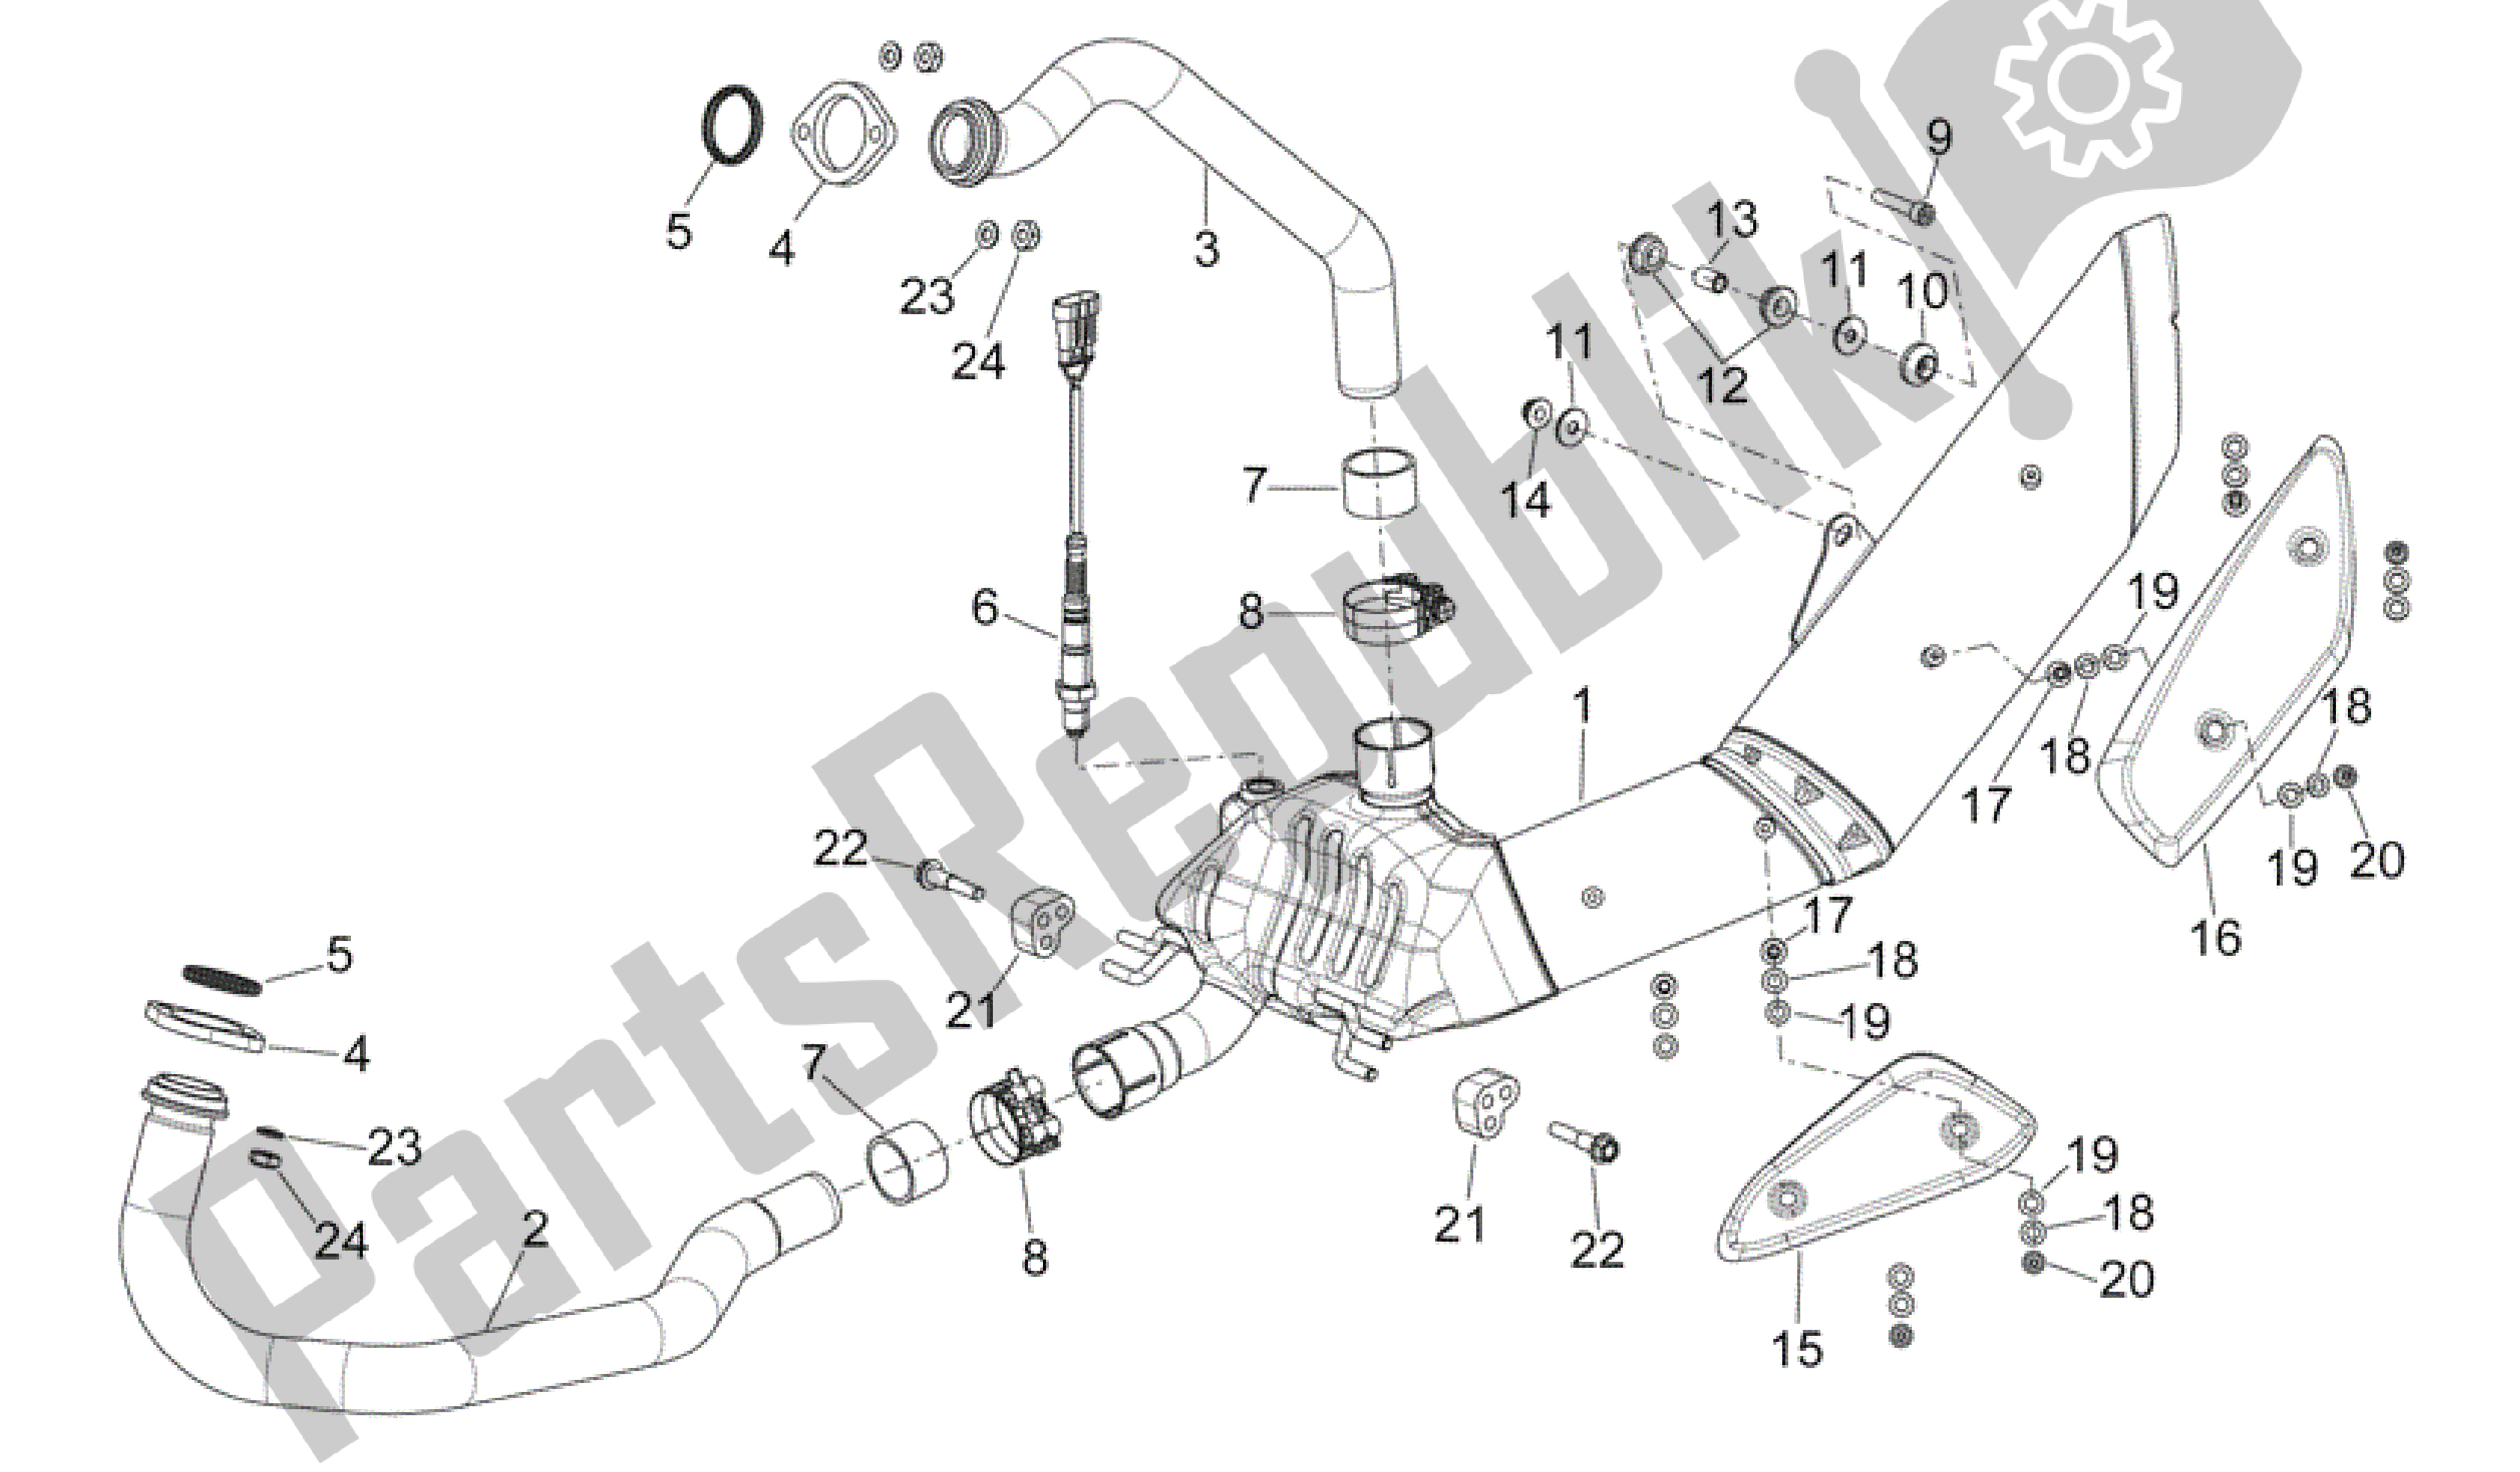 All parts for the Exhaust Unit of the Aprilia Mana 850 2007 - 2011